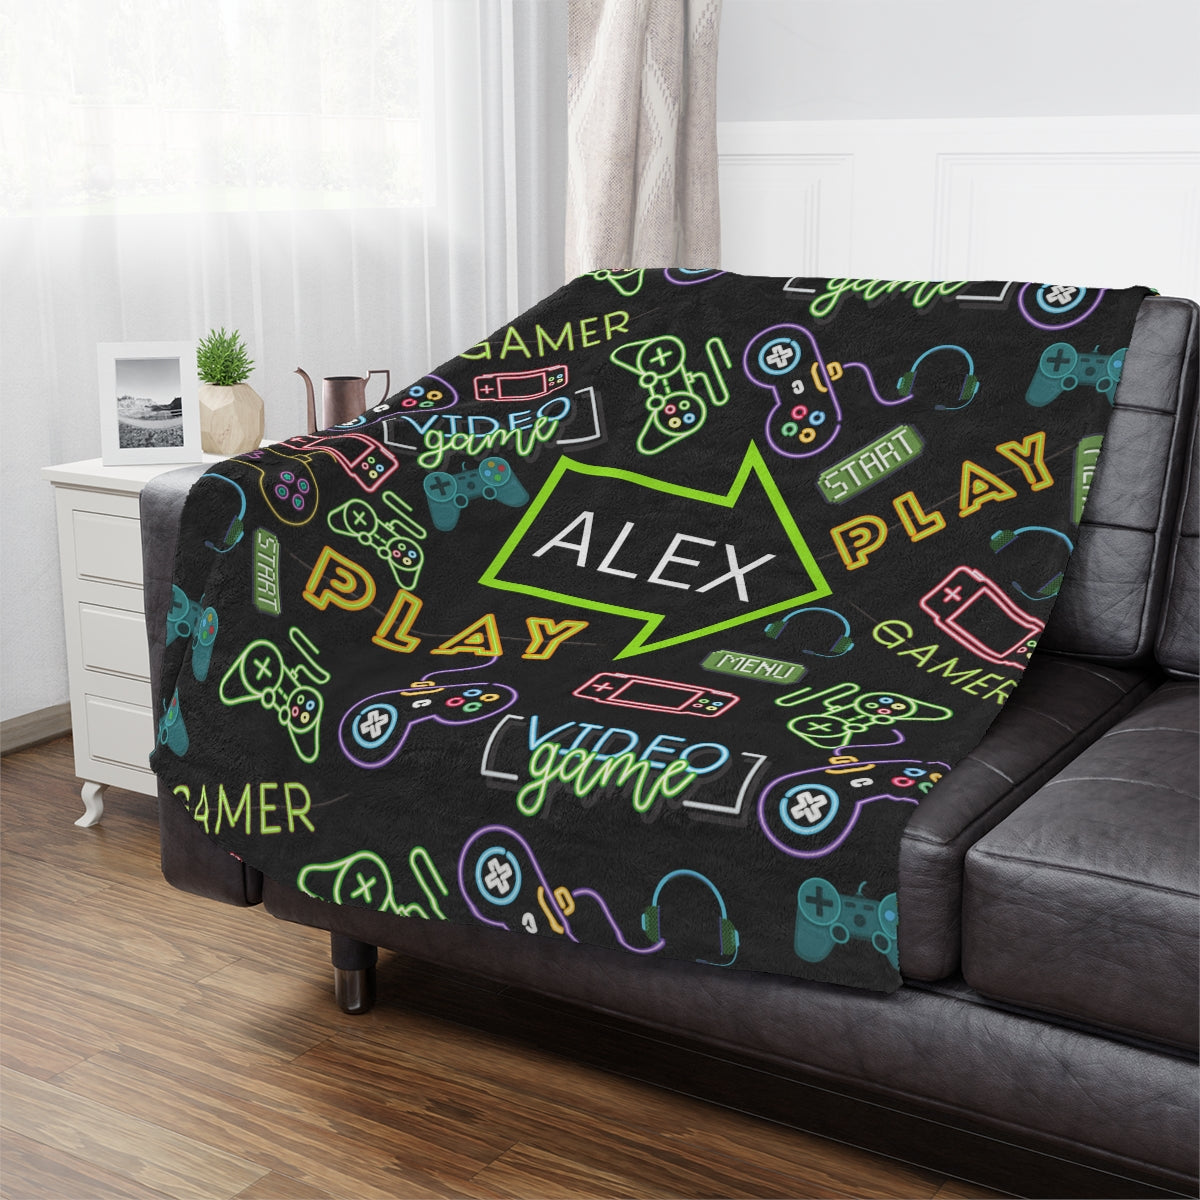 Video Game Blanket / Personalized Minky Blanket / 60" x 80"